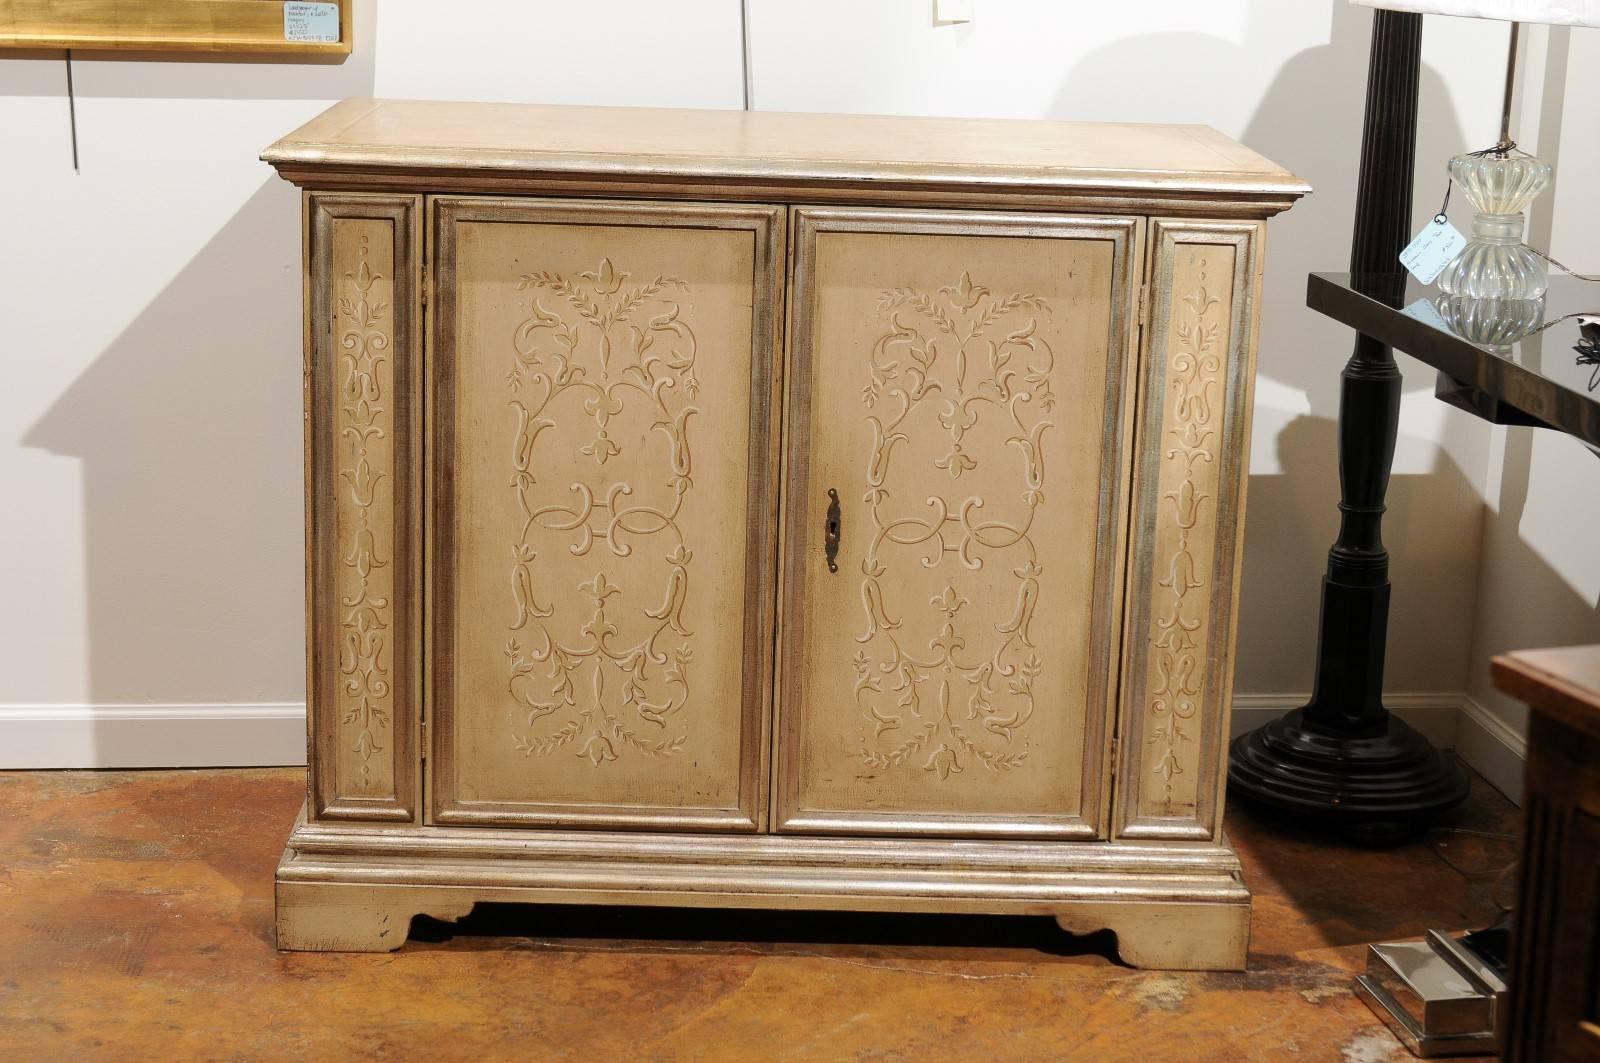 Hand-painted by Tuscan and local artisans, the painted Novella sink base cabinet bears striking resemblance to 200-year-old cabinets and is a stunning addition to any room. Combined with gesso, gilding, and distressing, medium layers of pigment are